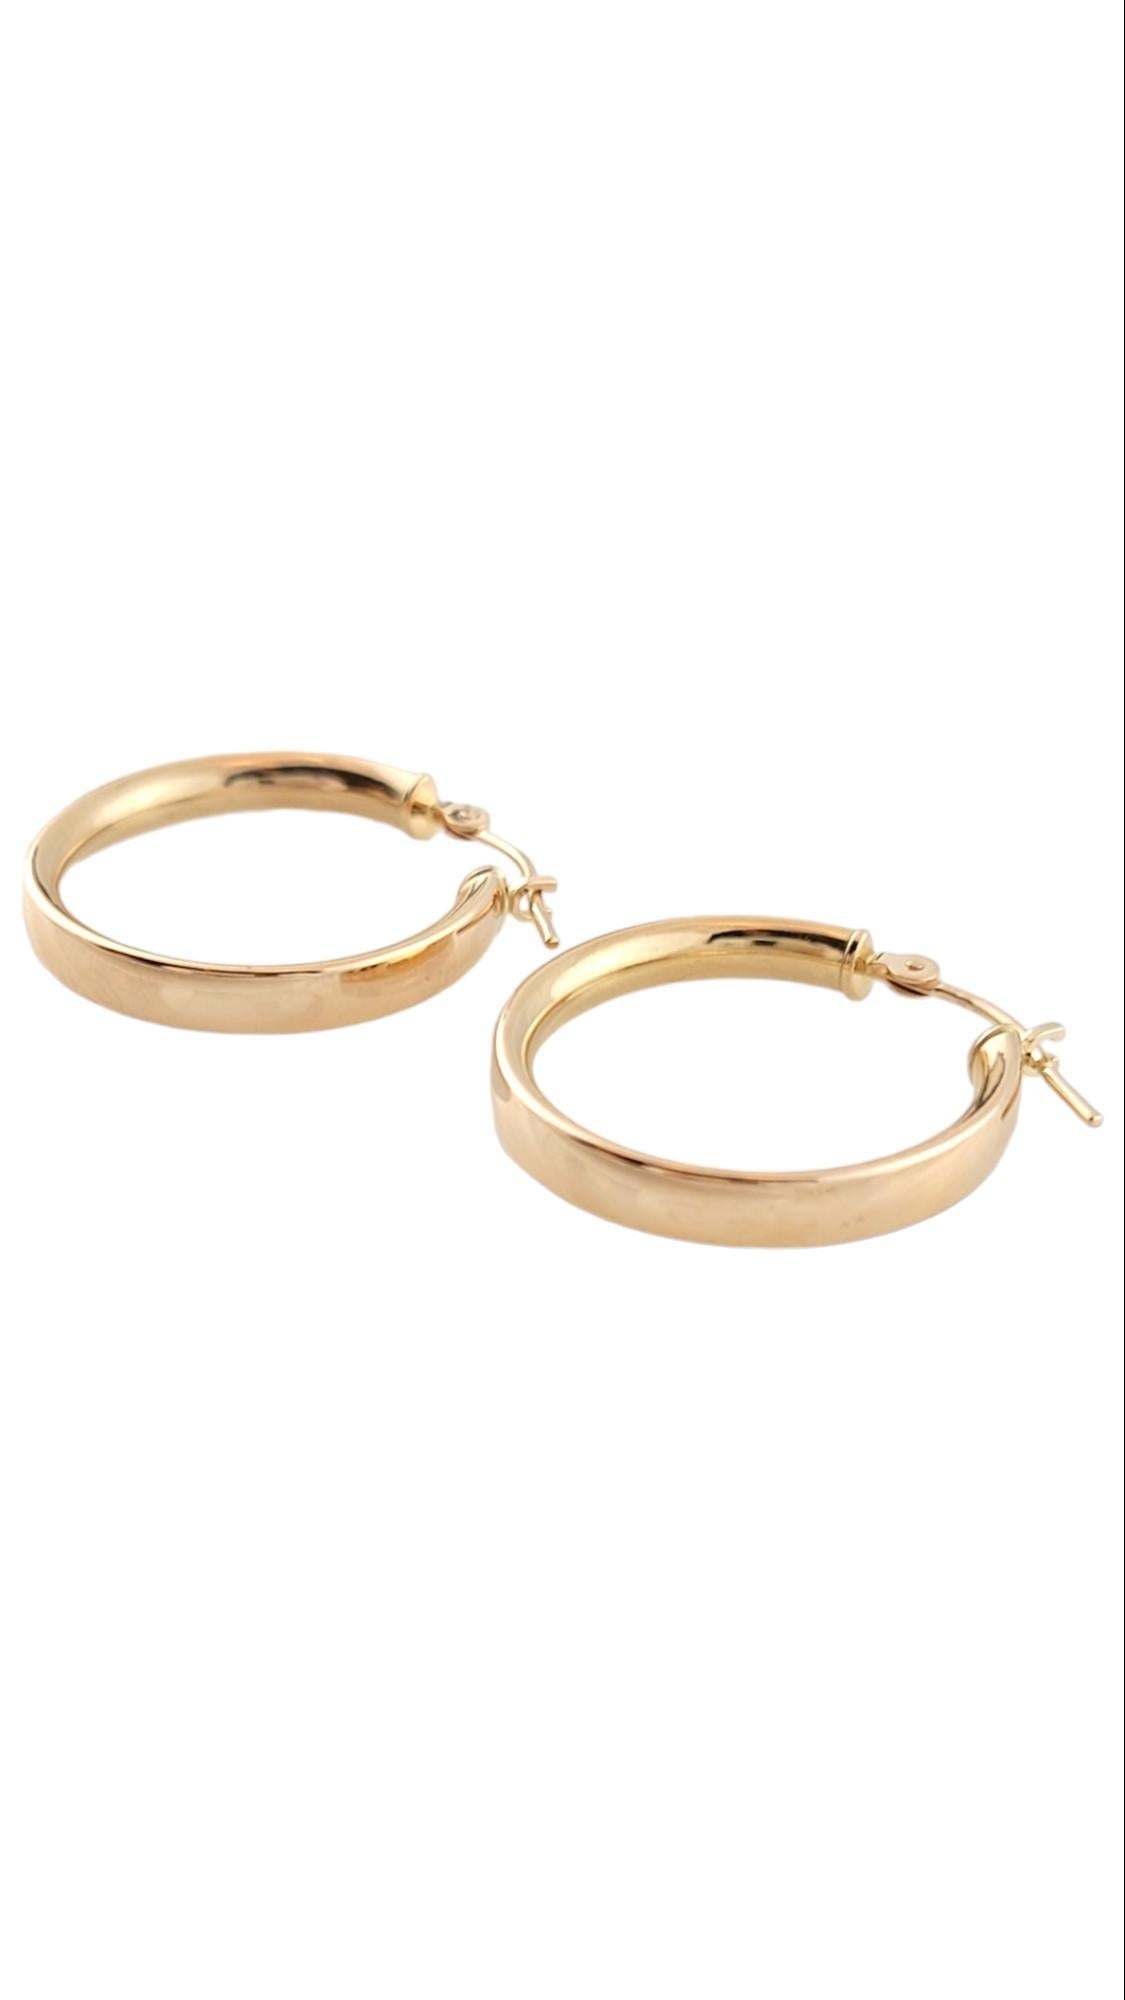 14K Yellow Gold Hoops

This gorgeous set of classic hoops are crafted from 14K yellow gold!

Diameter: 20.14mm / 0.79